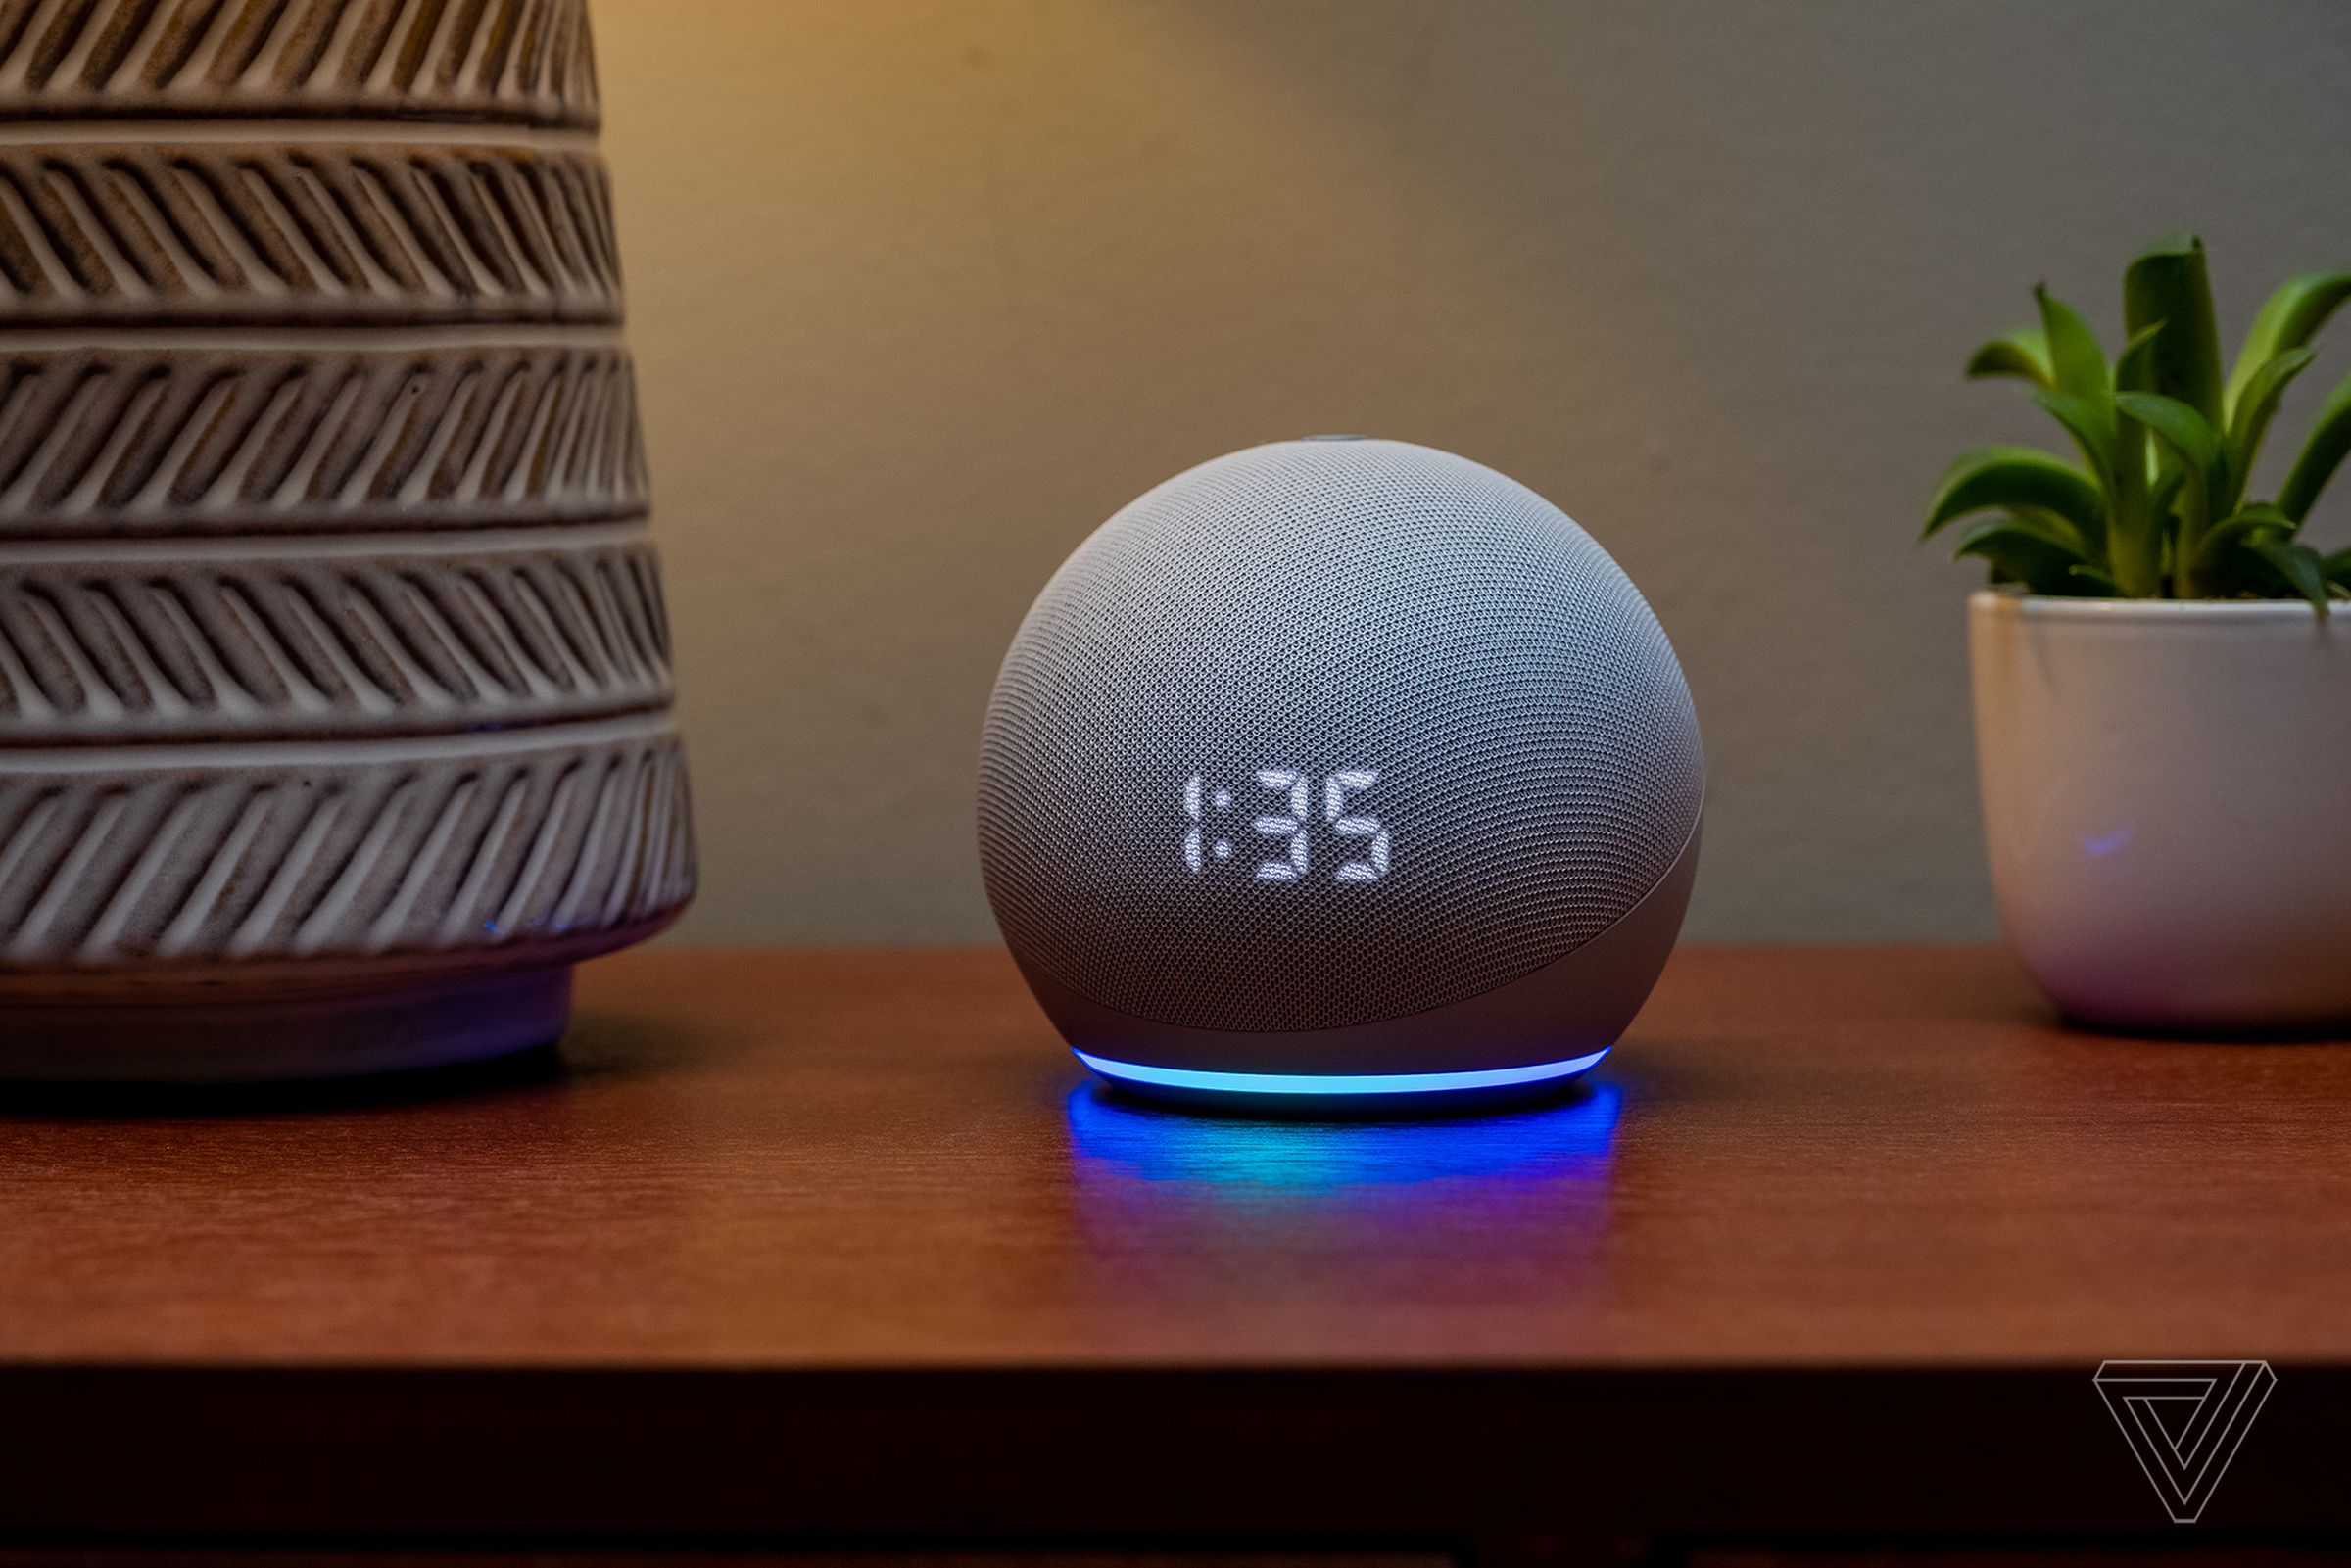 The Echo Dot with LED display is great for use as a nightstand alarm clock you can program by voice.